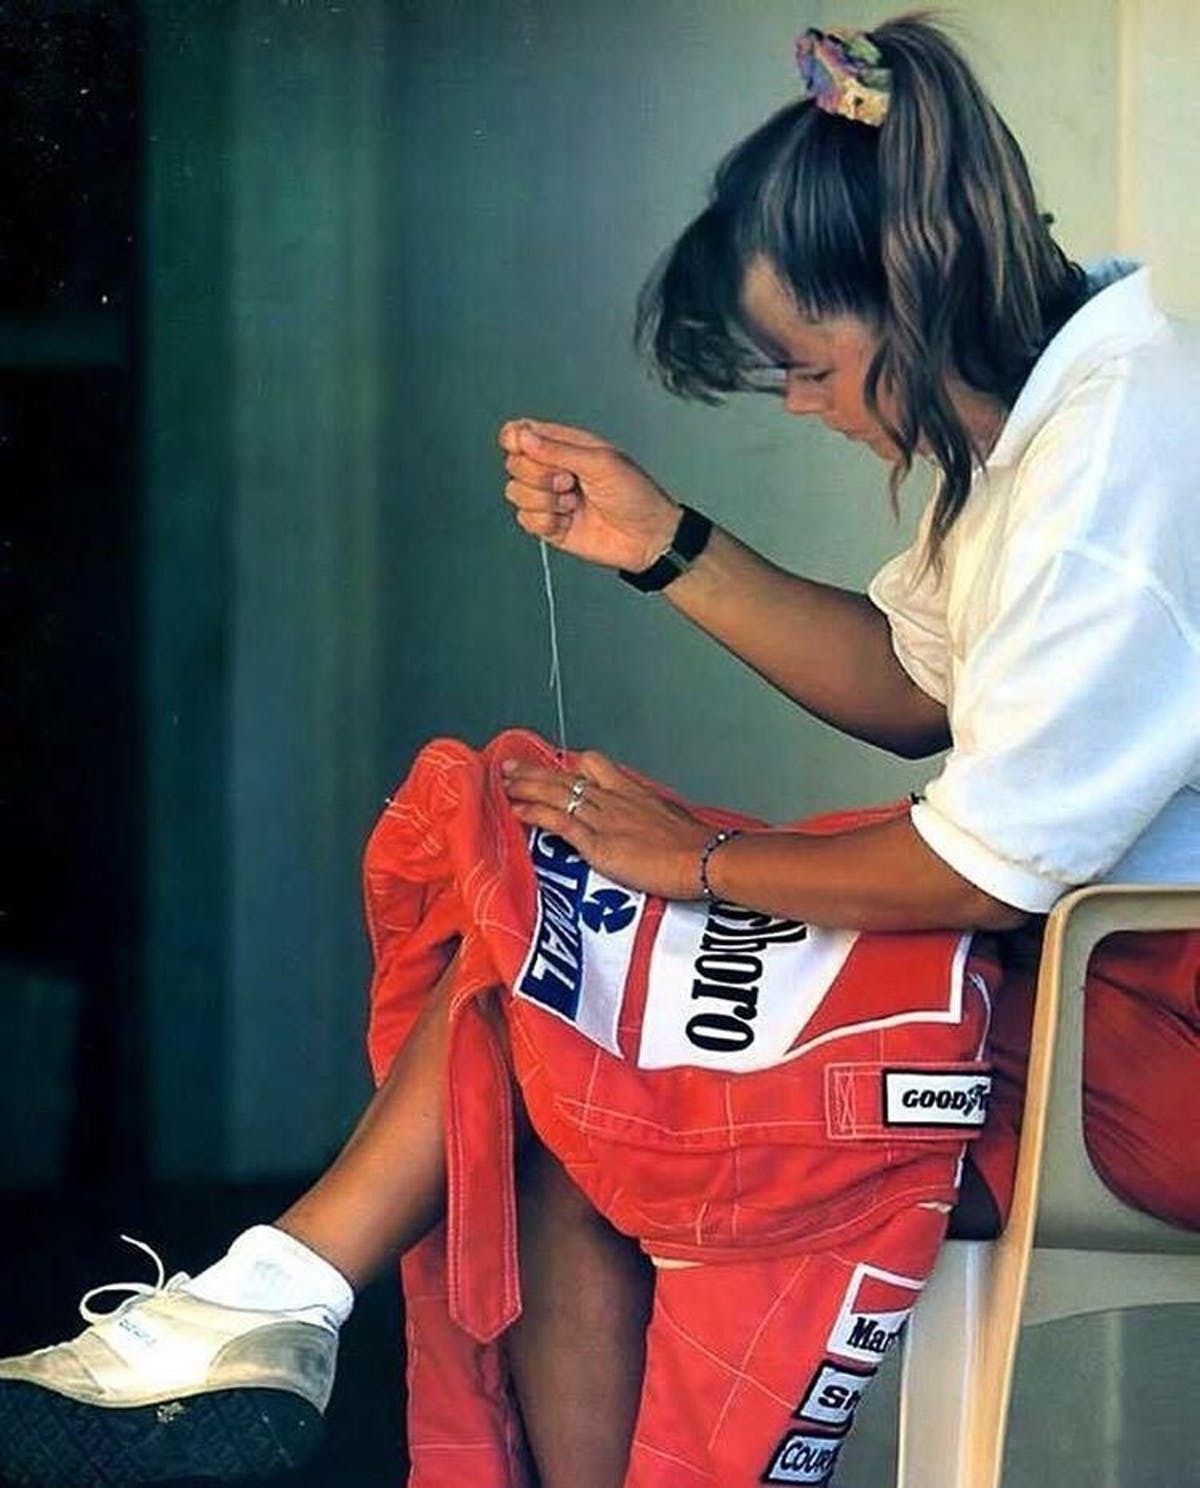 Ayrton Senna’s girlfriend makes last minute alterations to his racing overalls.